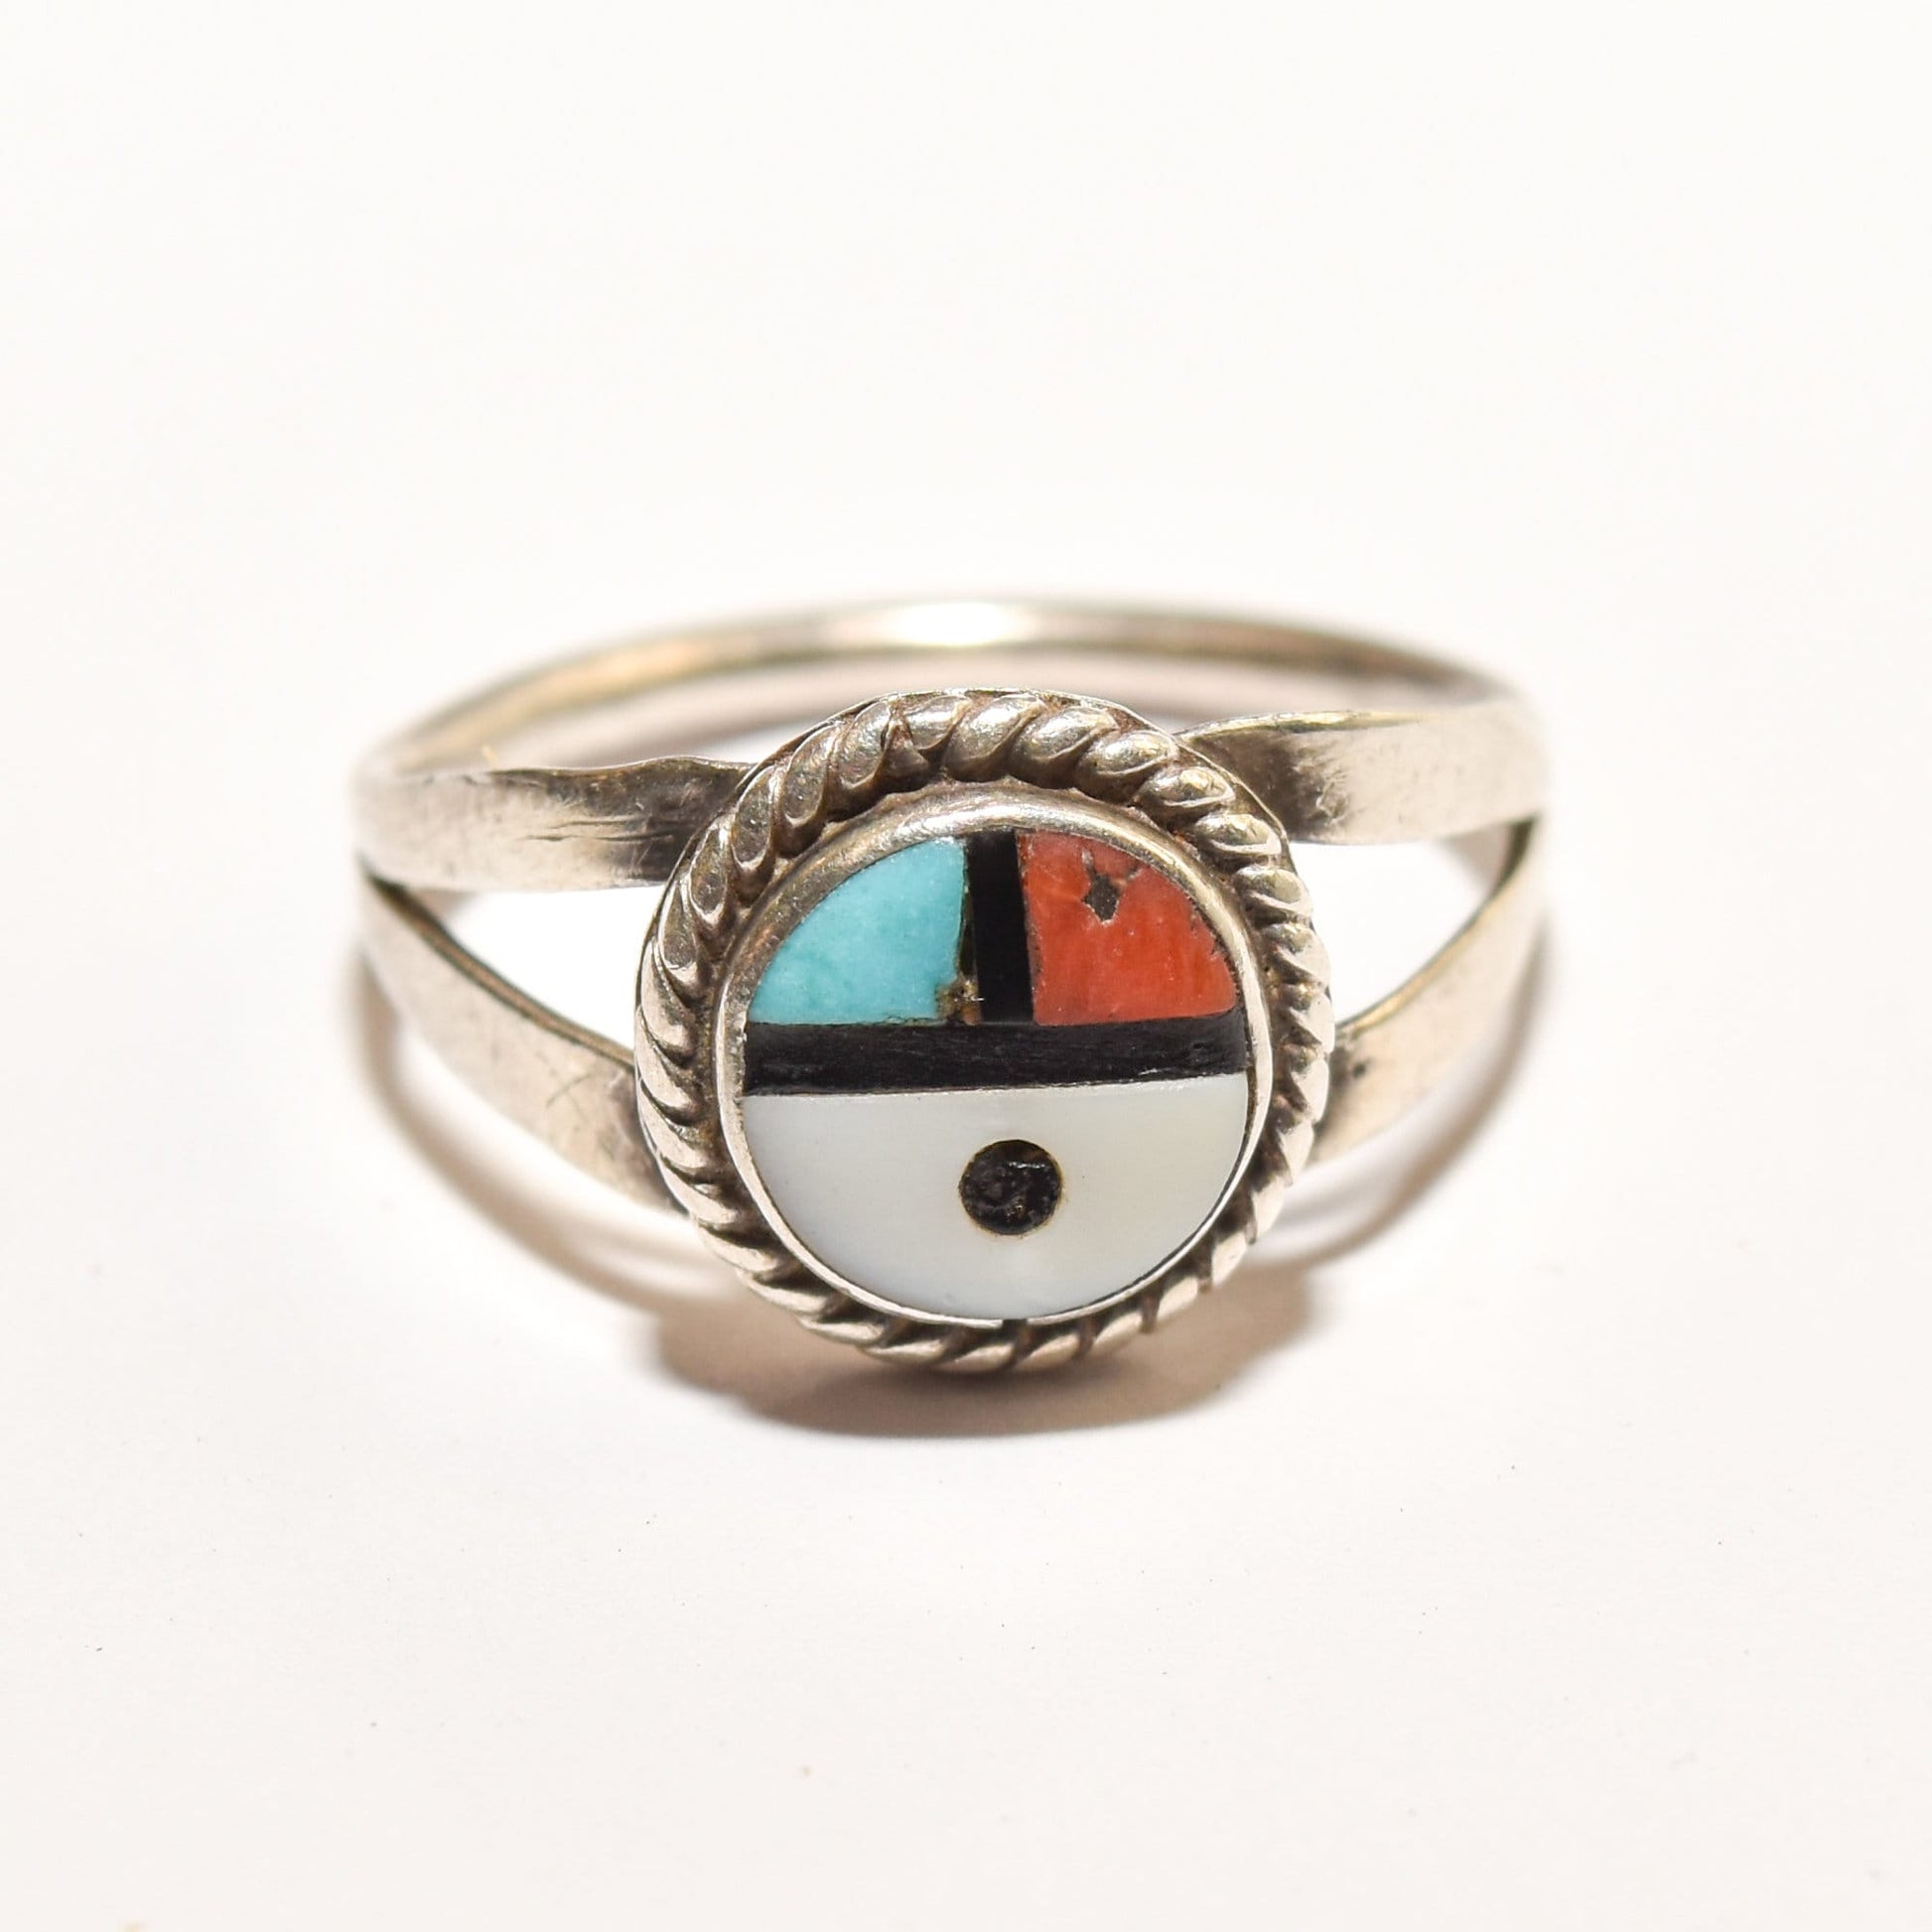 Sterling silver Little Zuni Sun Face ring with colorful inlay, Native American jewelry, size 5.25 US, on white background